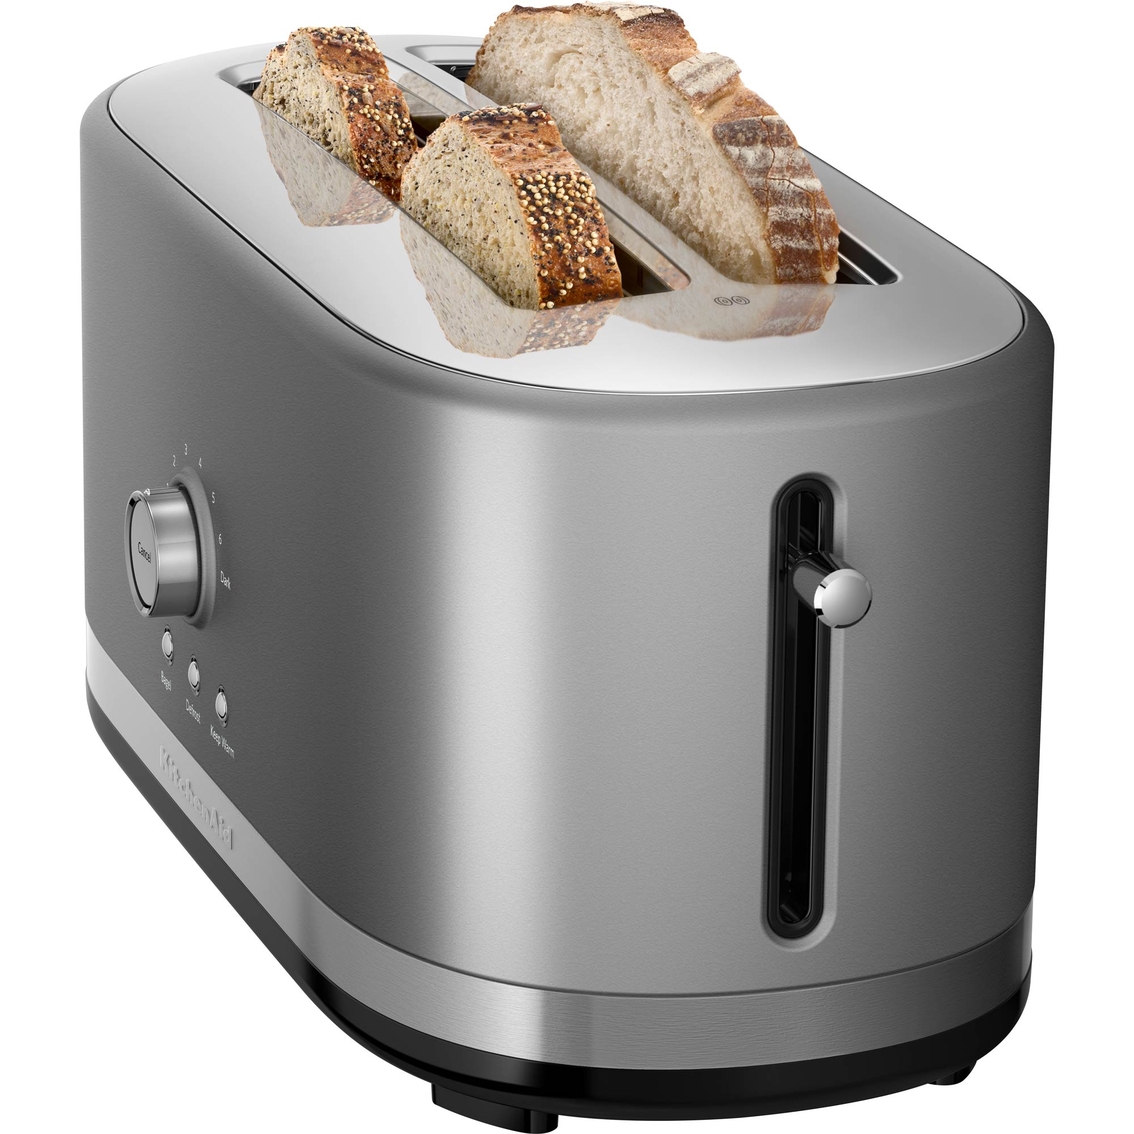 KitchenAid 2 Slice Long Slot Toaster with High-Lift Lever in